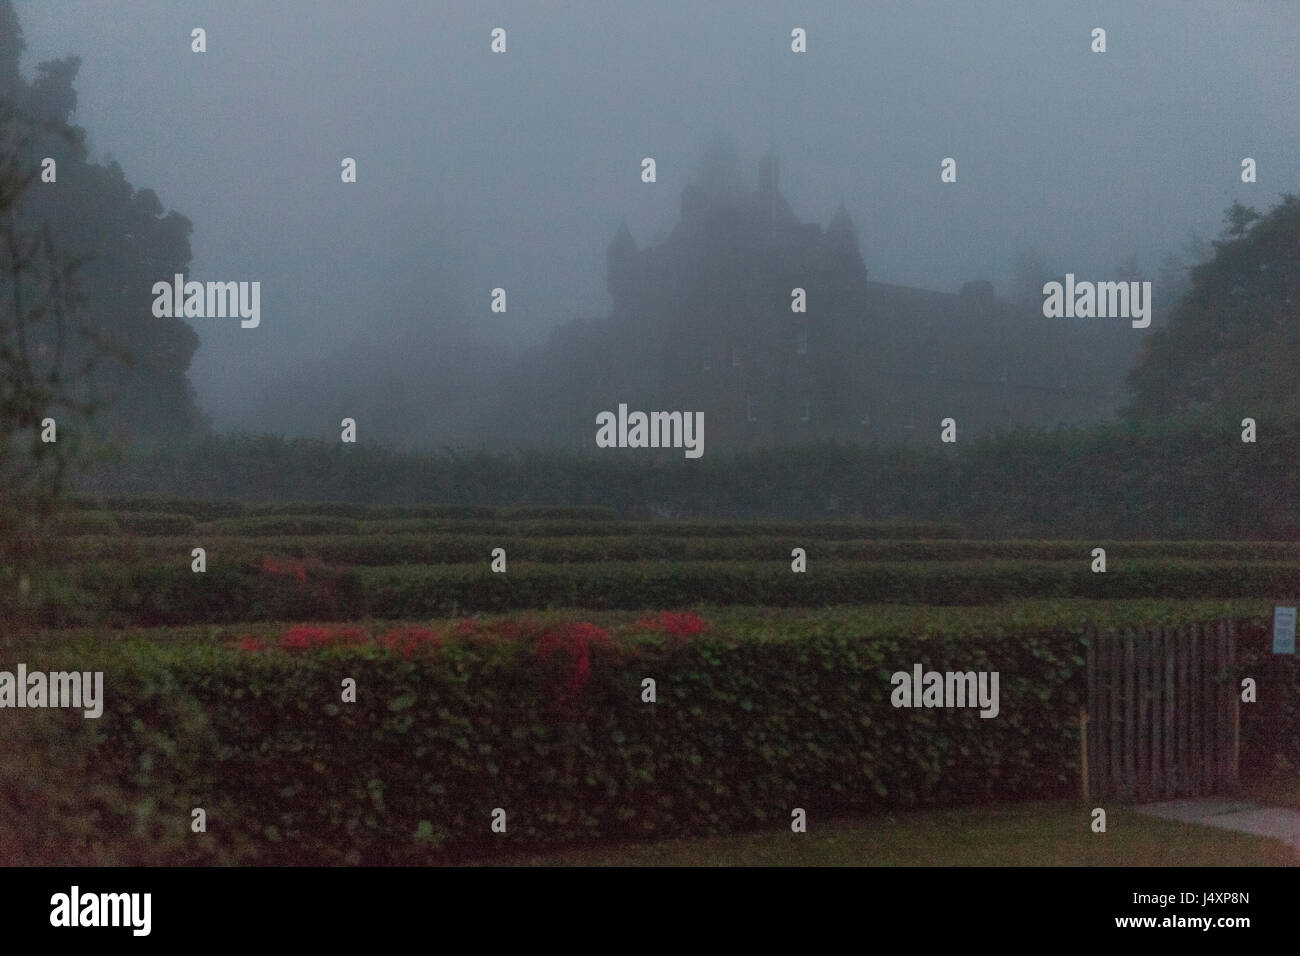 A view of Cawdor Castle in the early morning mist, Nairnshire, Scotland. Derek Hudson / Alamy Stock Photo Stock Photo